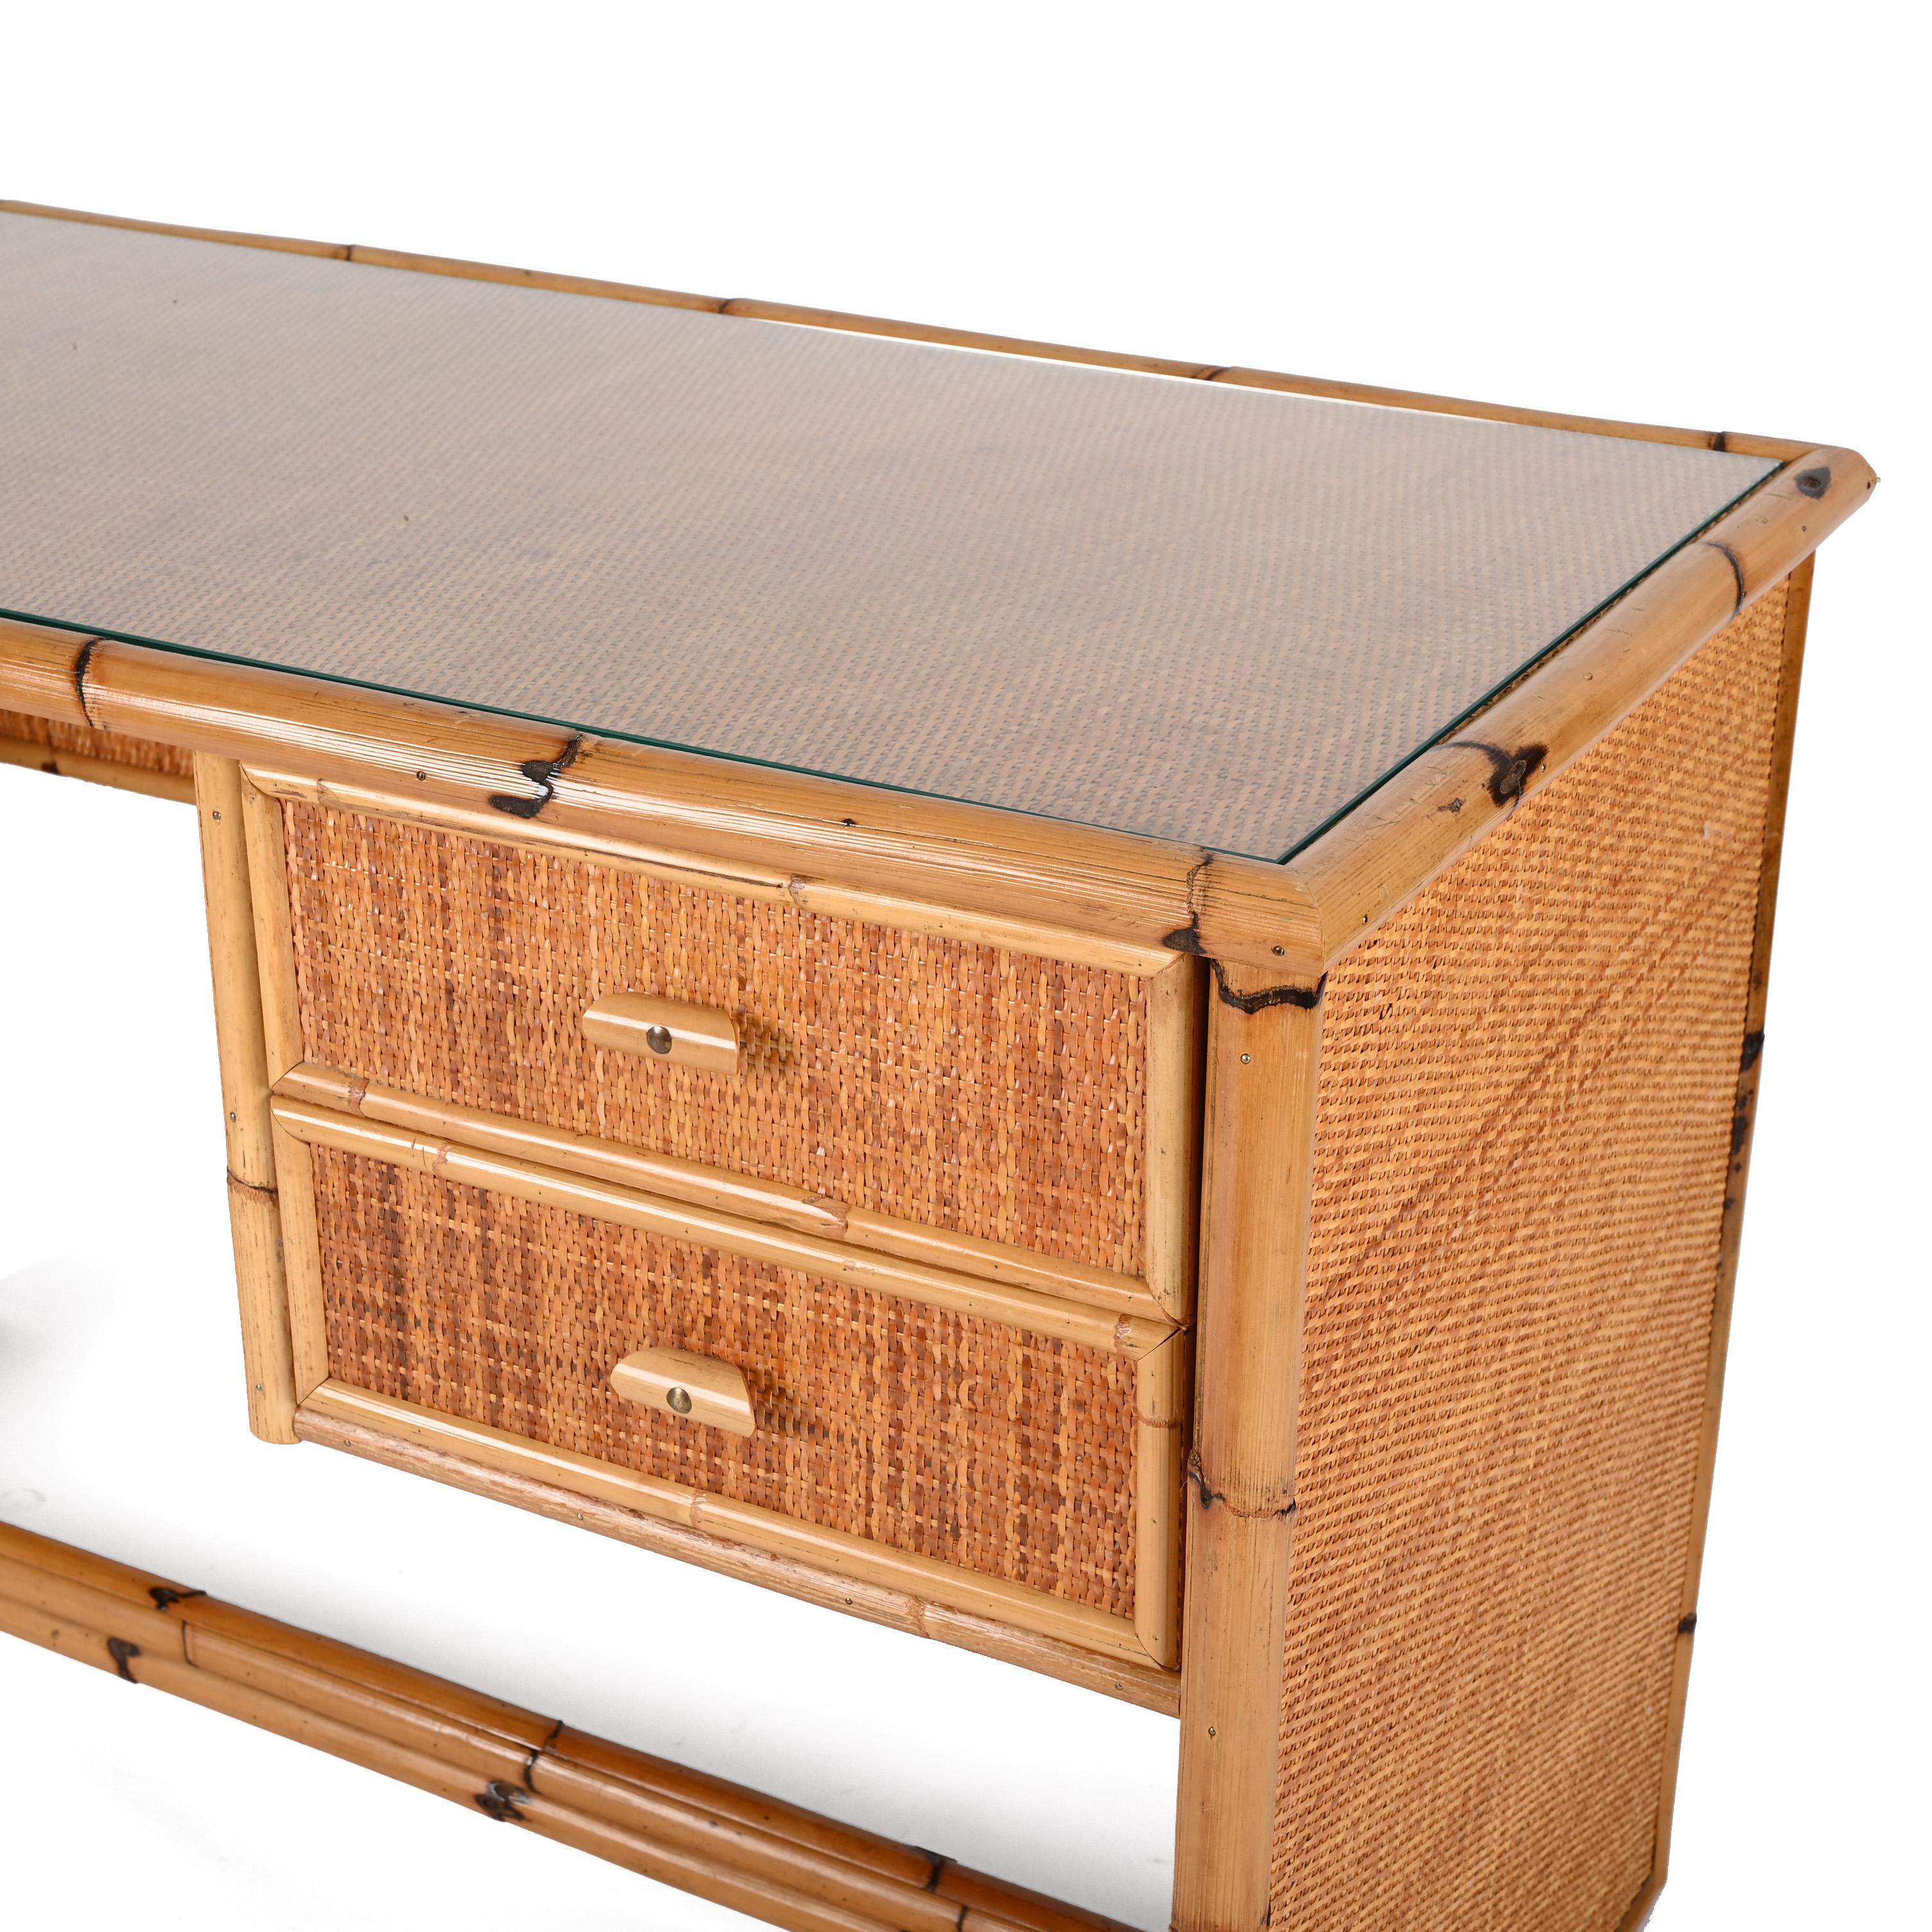 Midcentury Glass Top, Bamboo and Wicker Italian Desk with Drawers, 1980s For Sale 11